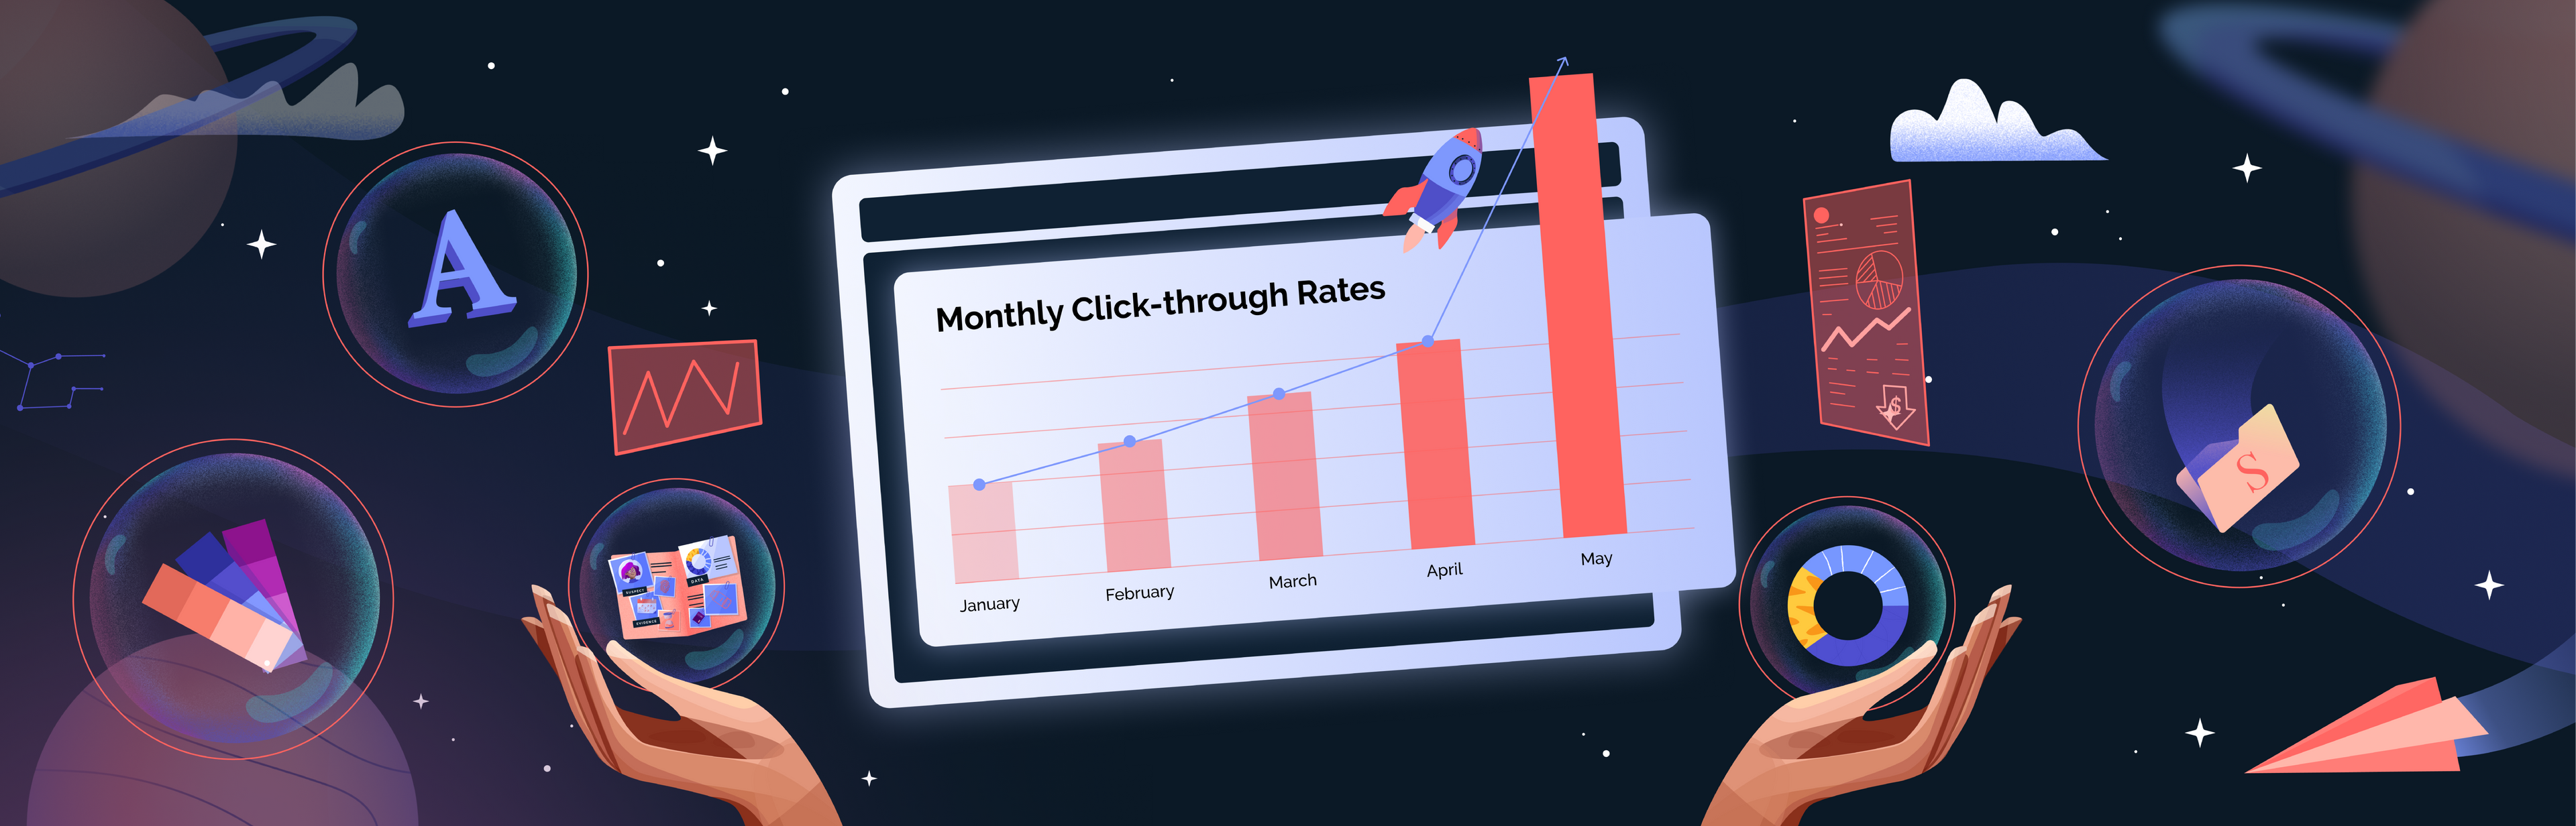 2 Design Tactics to Triple Your Click-Through Rate Right Now - Superside